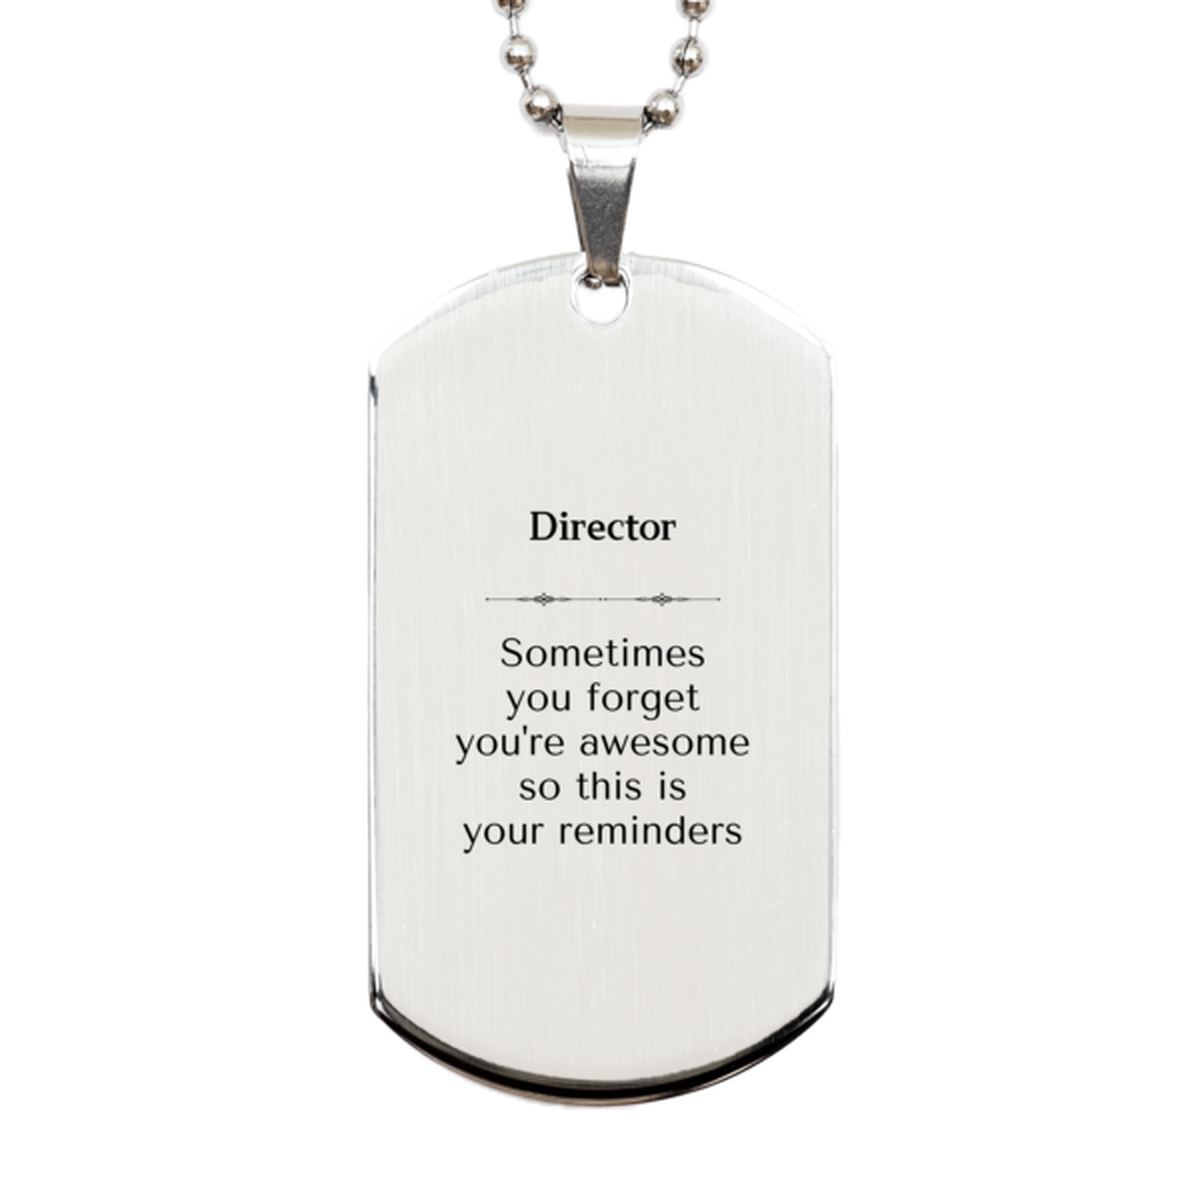 Sentimental Director Silver Dog Tag, Director Sometimes you forget you're awesome so this is your reminders, Graduation Christmas Birthday Gifts for Director, Men, Women, Coworkers